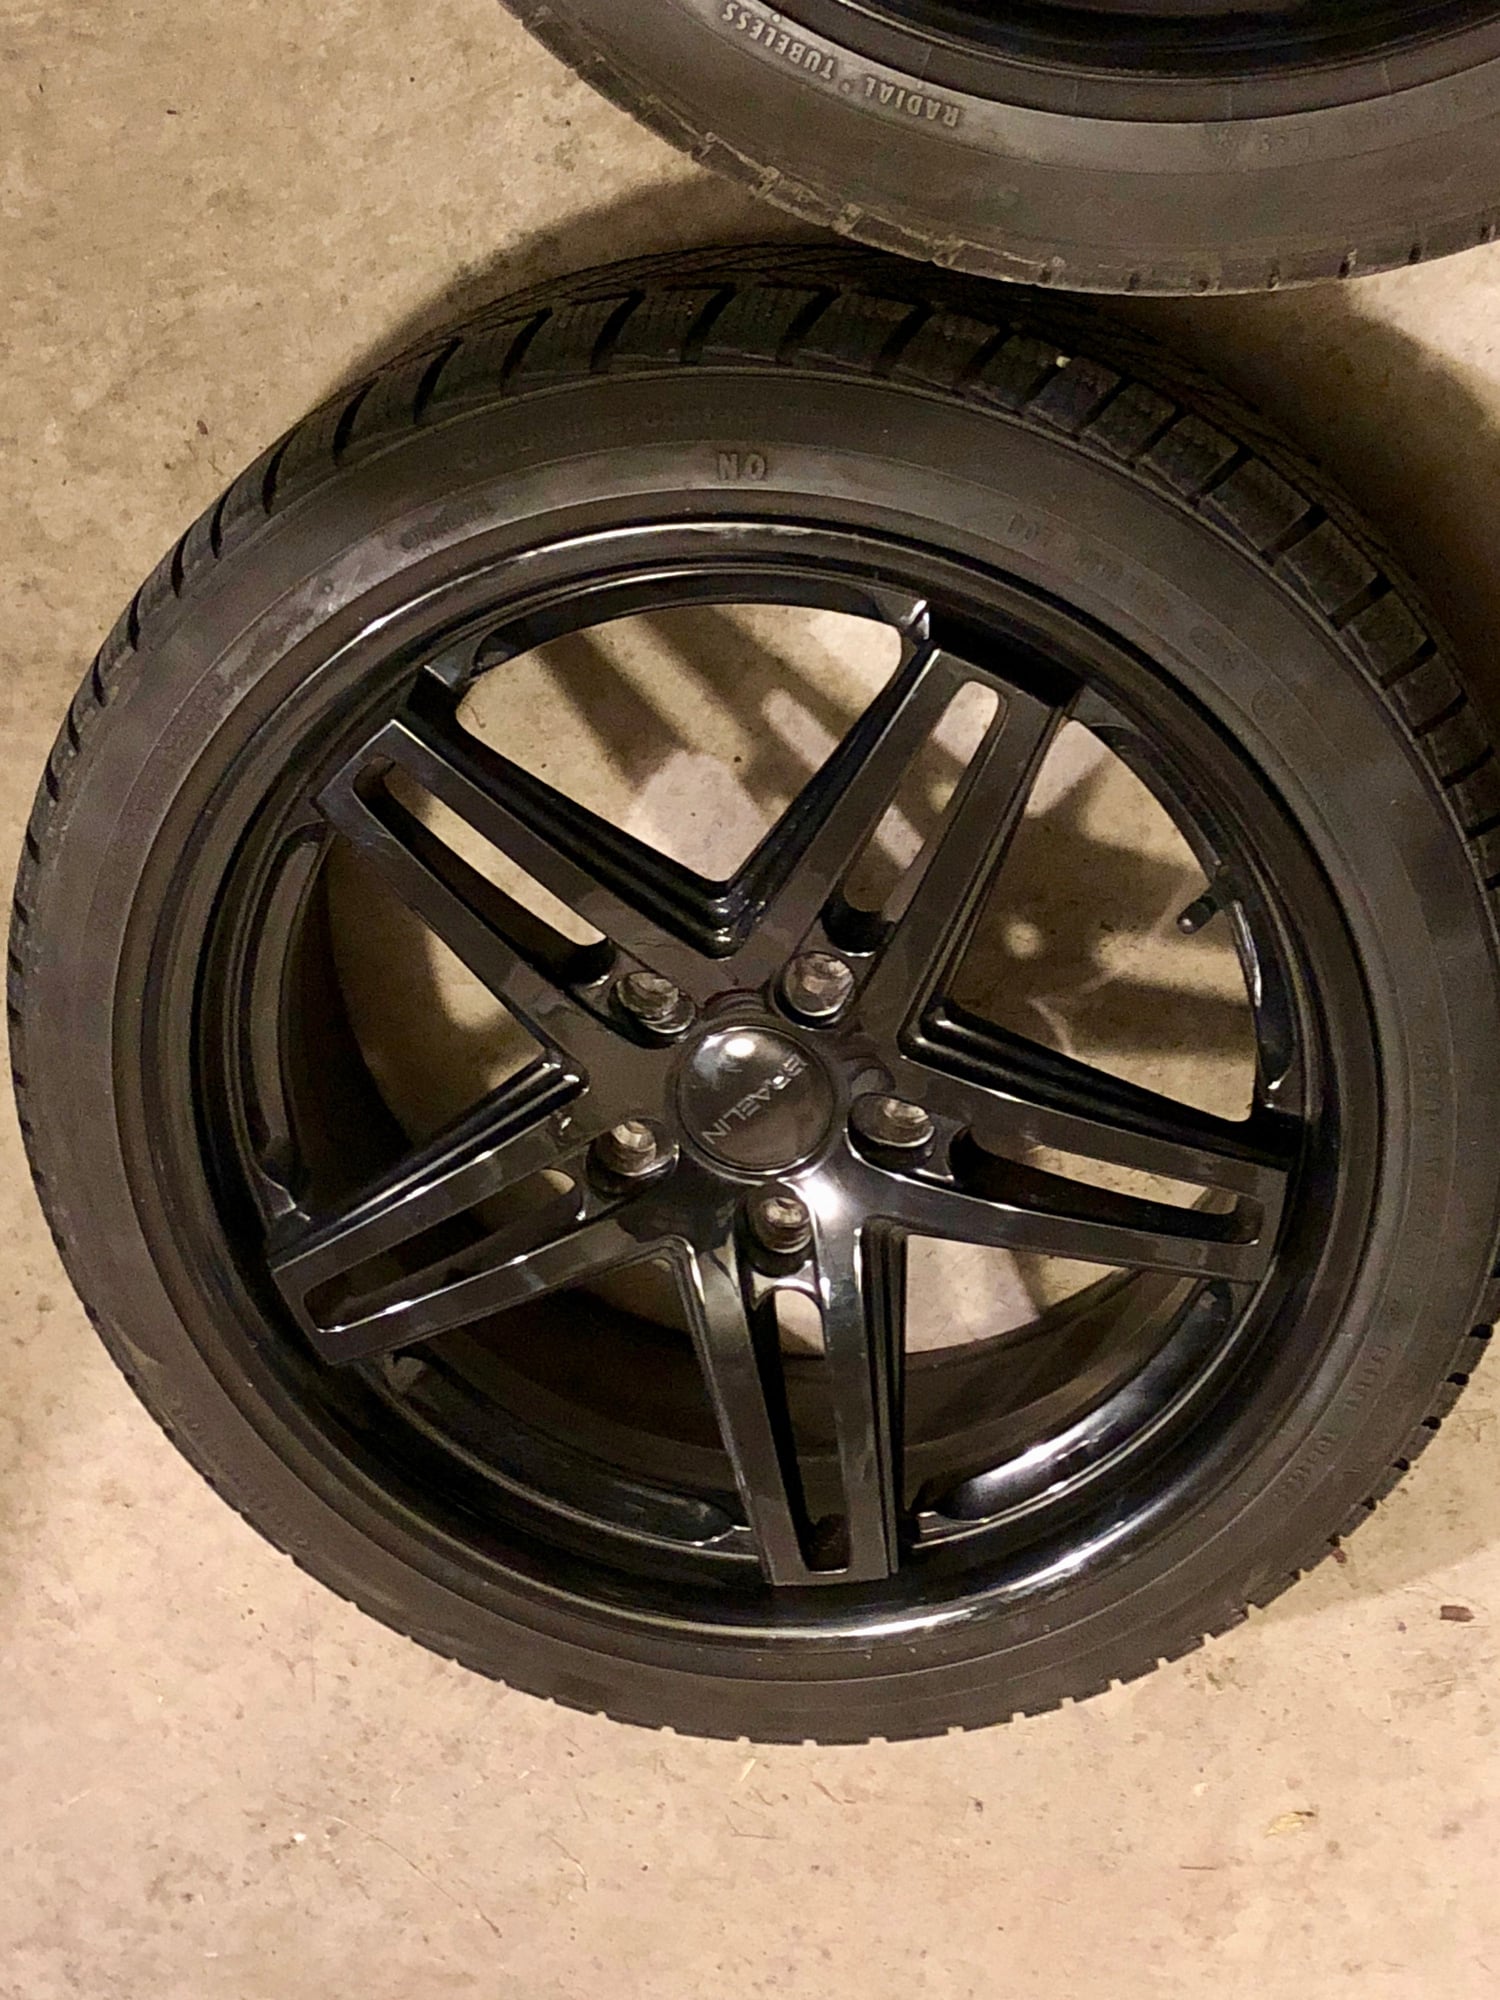 Wheels and Tires/Axles - Continental ContiWinterContact TS830 / Braelin BR05 (Black) Wheels 19" w TPMS Sensors - Used - 2017 to 2019 Porsche 911 - Toronto, ON M7A1Z1, Canada